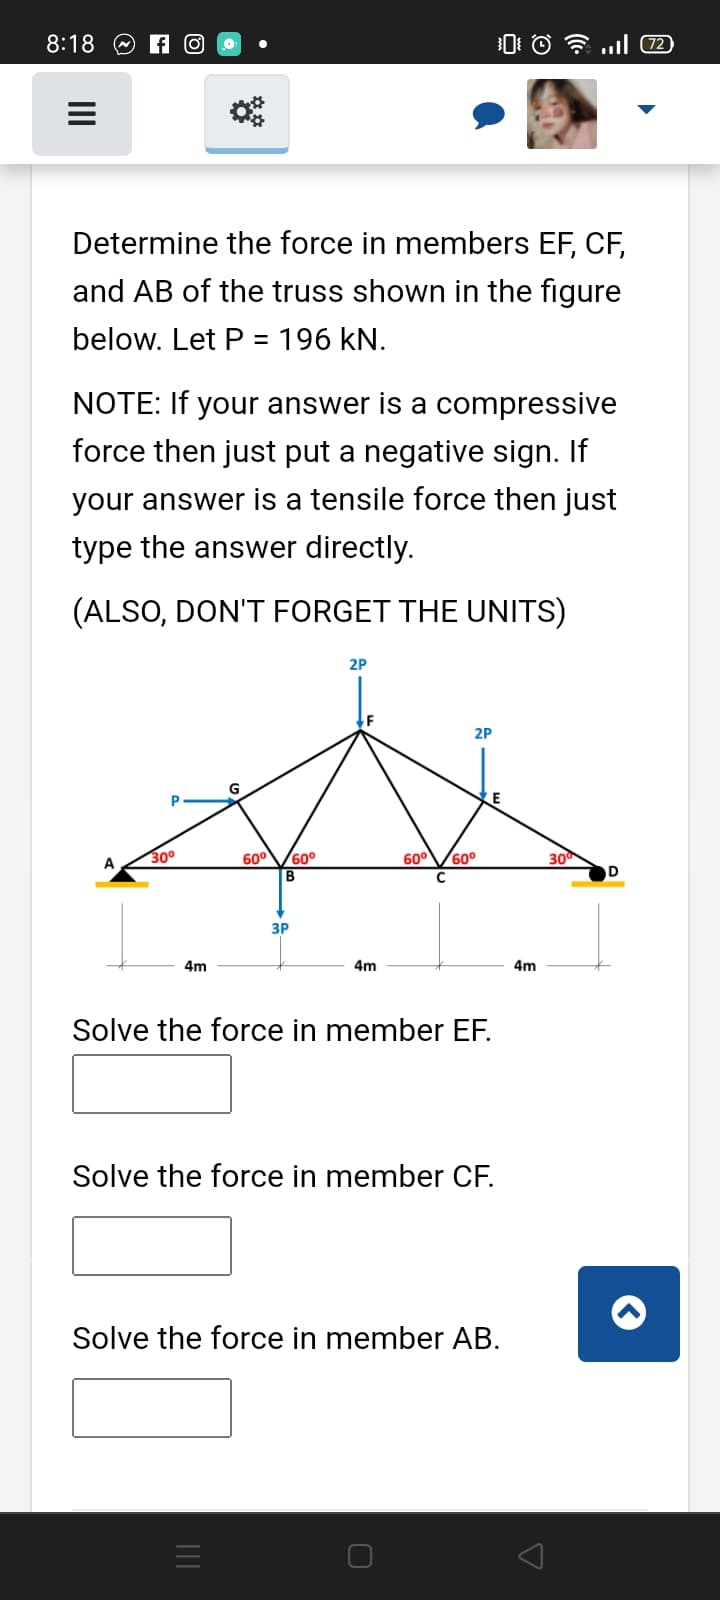 8:18 O A O
Determine the force in members EF, CF,
and AB of the truss shown in the figure
below. Let P = 196 kN.
NOTE: If your answer is a compressive
force then just put a negative sign. If
your answer is a tensile force then just
type the answer directly.
(ALSO, DON'T FORGET THE UNITS)
2P
2P
30°
60°
60°
В
60°V60°
A
30
ЗР
4m
4m
4m
Solve the force in member EF.
Solve the force in member CF.
Solve the force in member AB.
